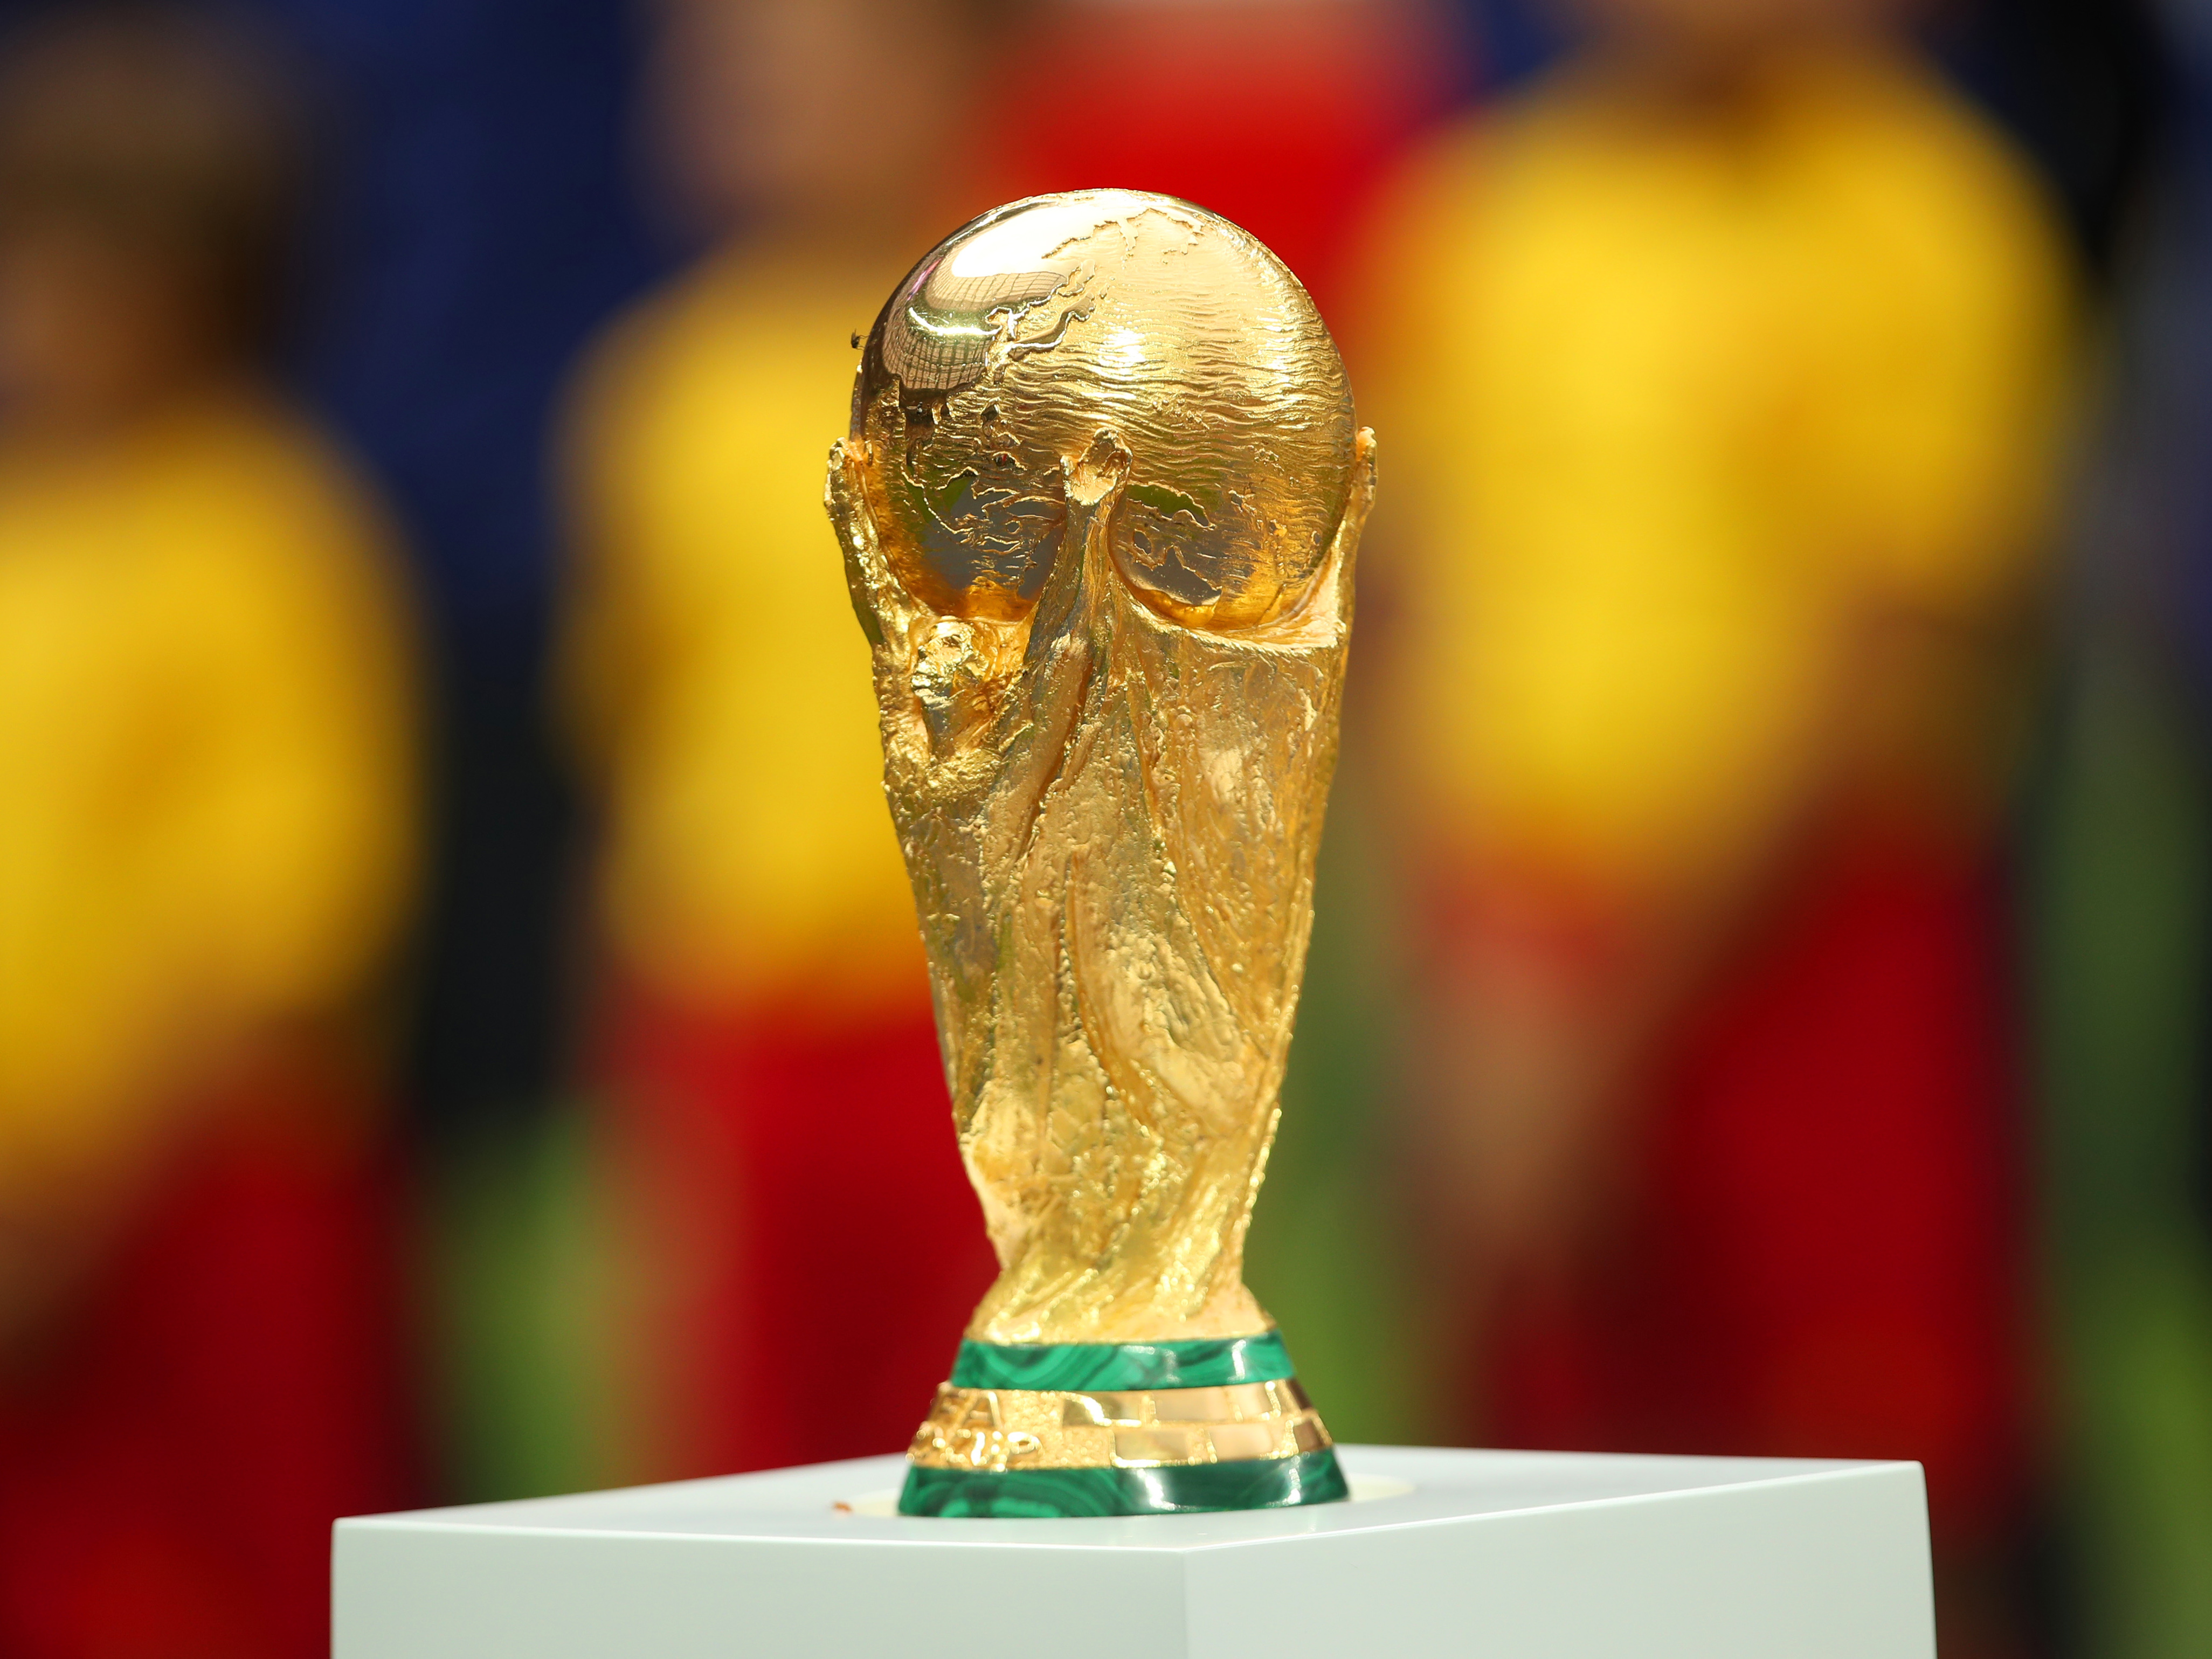 The FIFA World Cup trophy